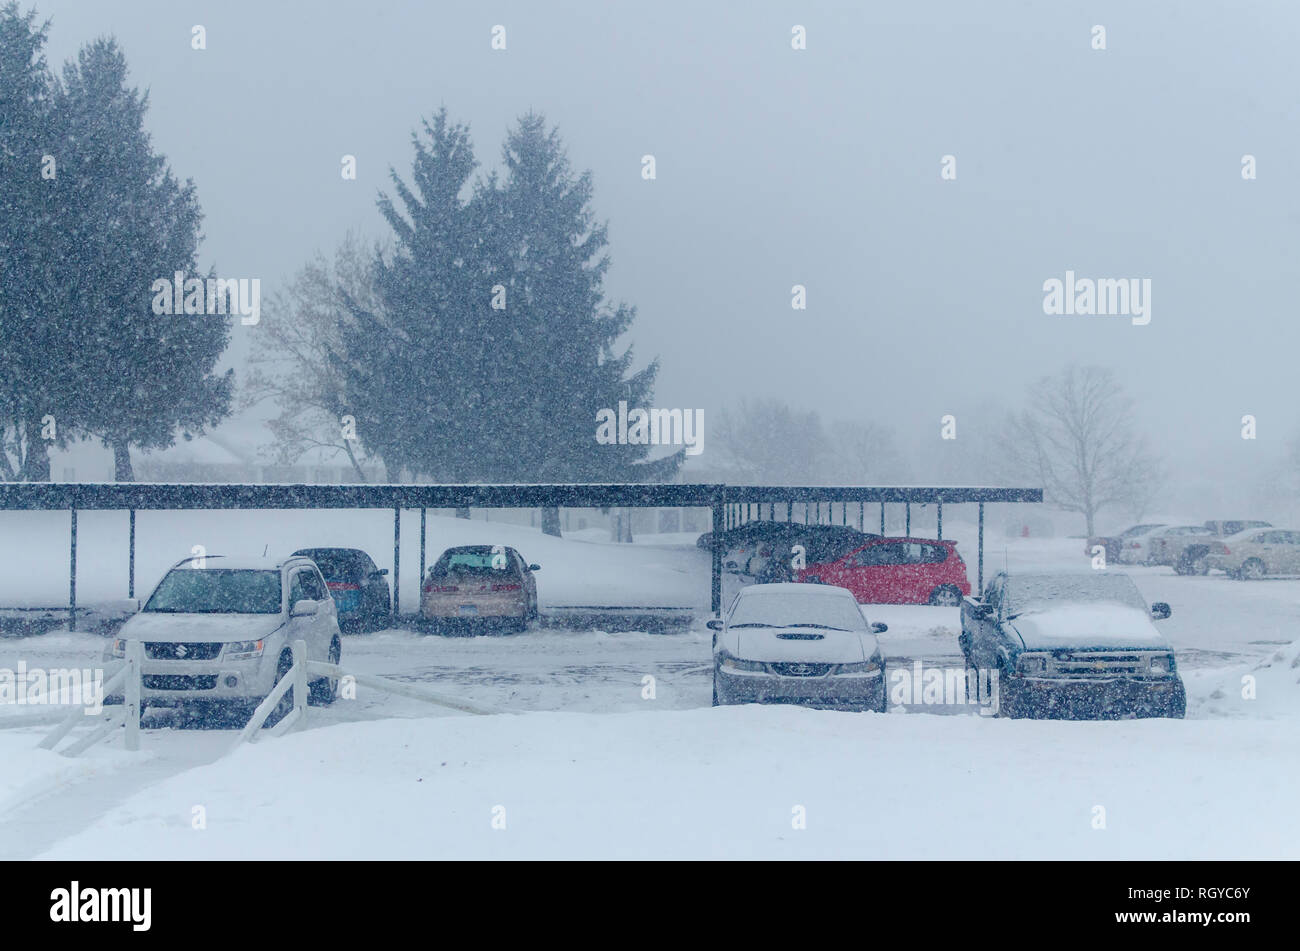 Heavy snow falling on and slowly covering the top of vehicles parked outside of an apartment complex during a heavy snowstorm in Michigan, USA. Stock Photo